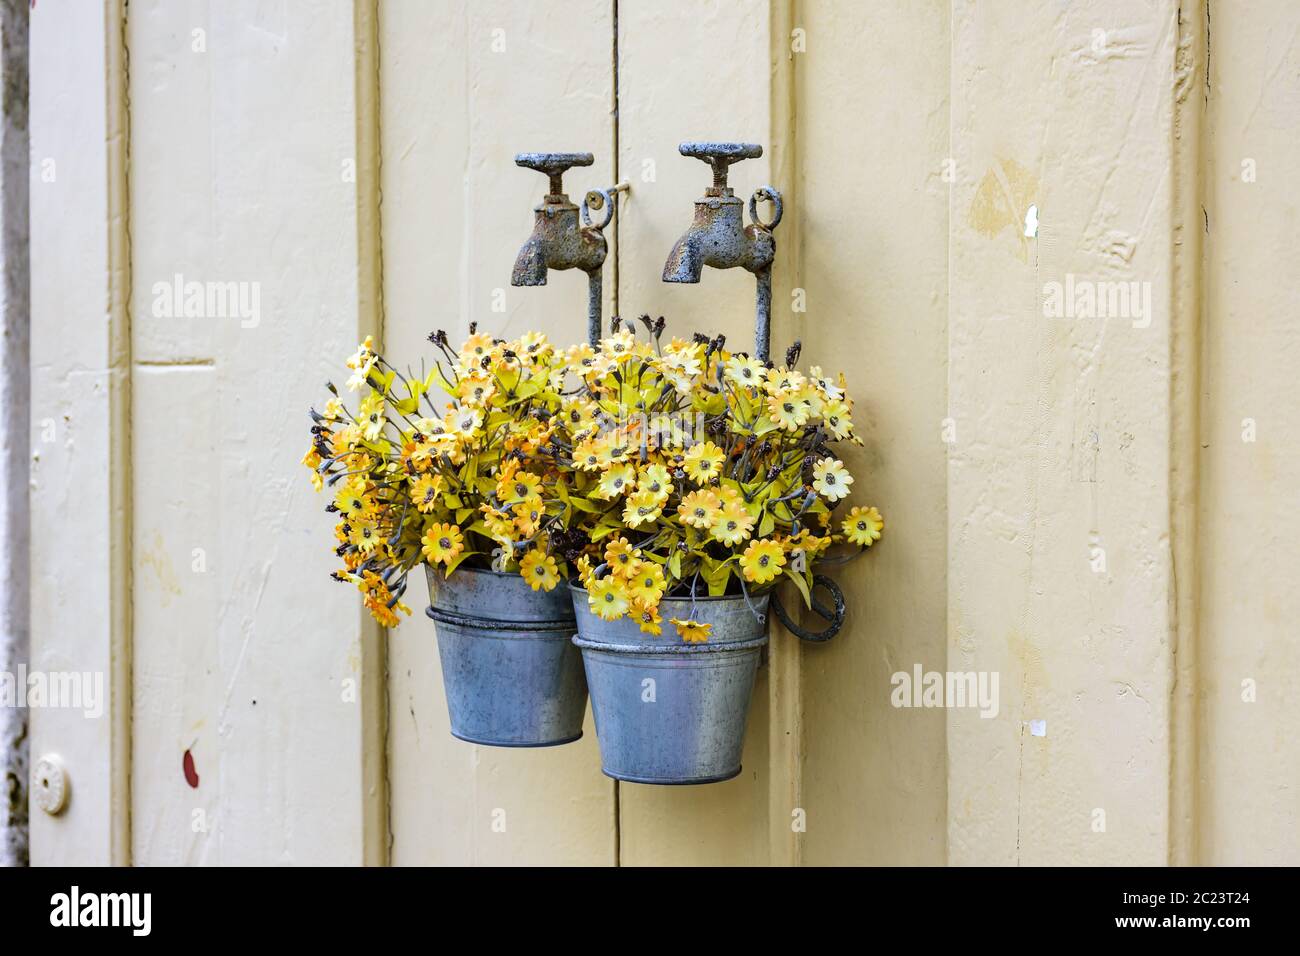 Bucket with flowers hanging on an old faucet Stock Photo